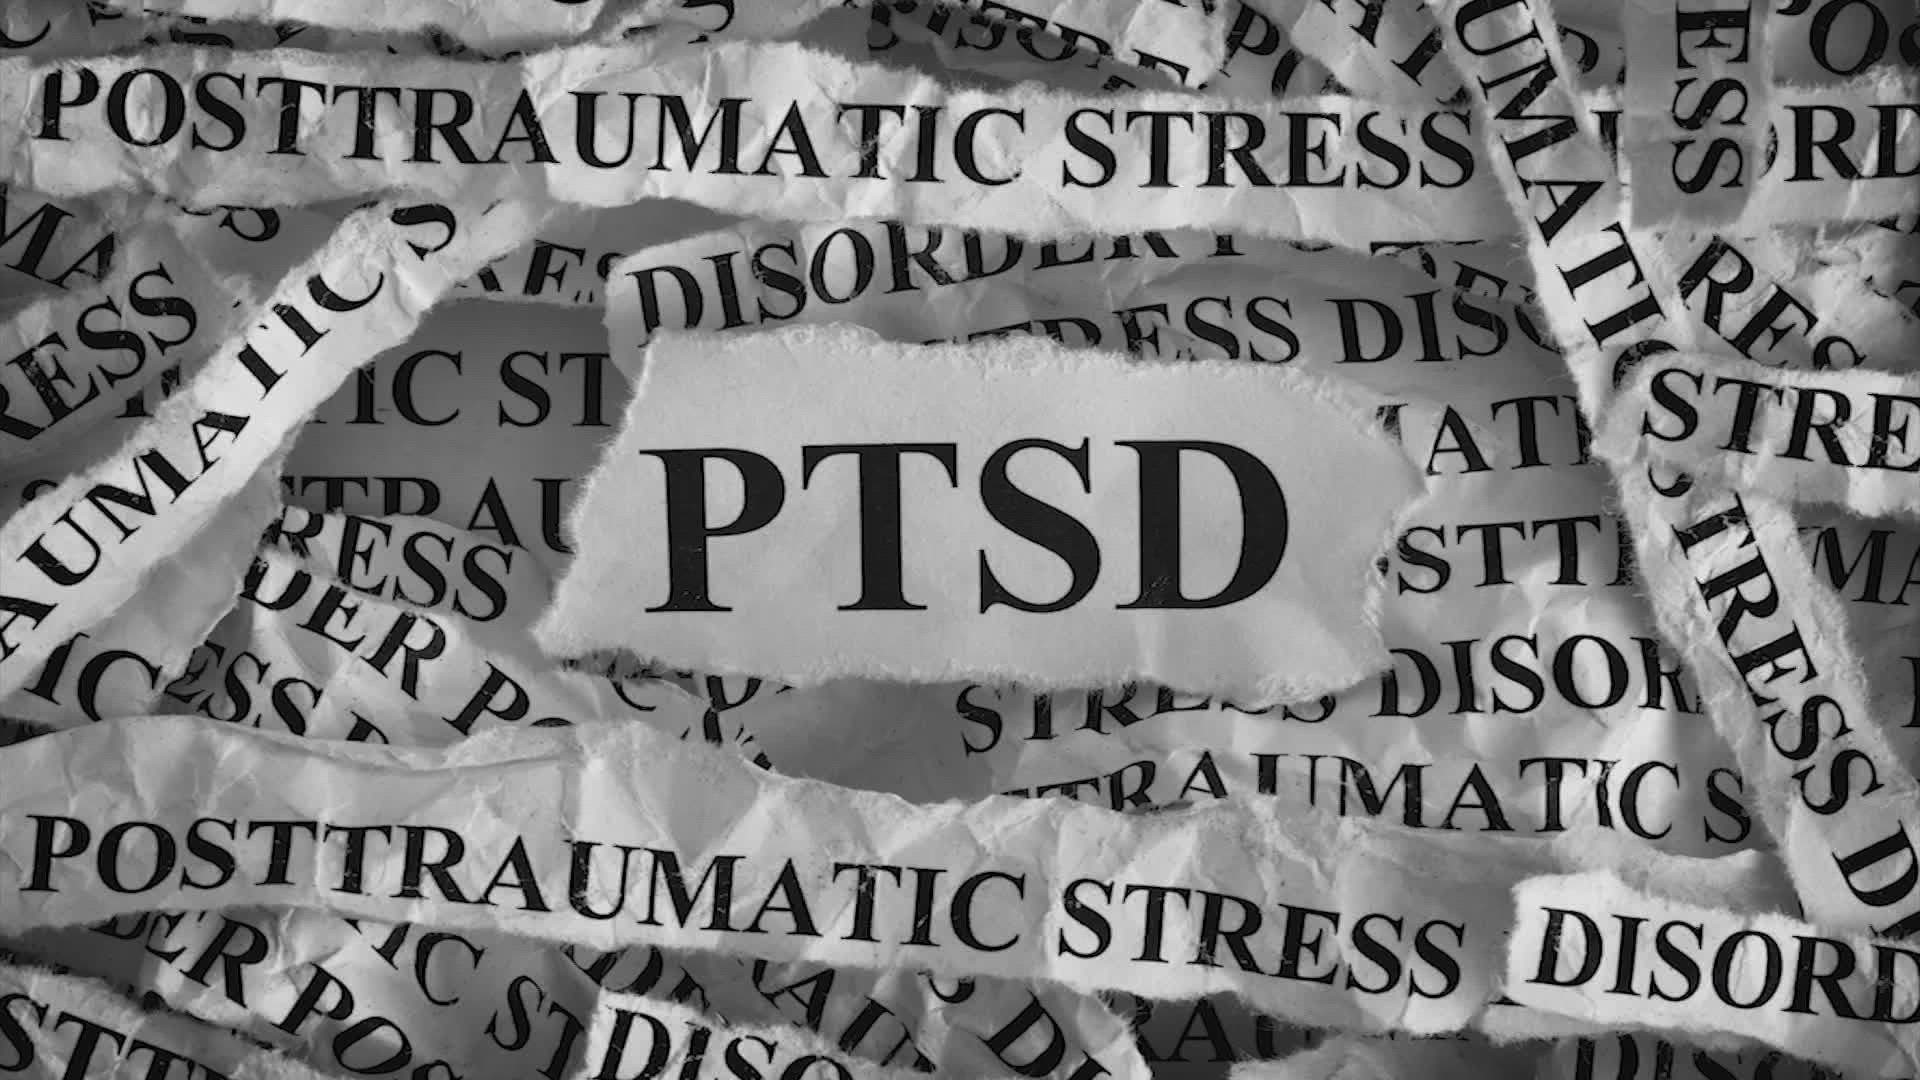 While PTSD is typically suffered by those who witness a terrifying experience firsthand, it can also be experienced by those around them and first responders.